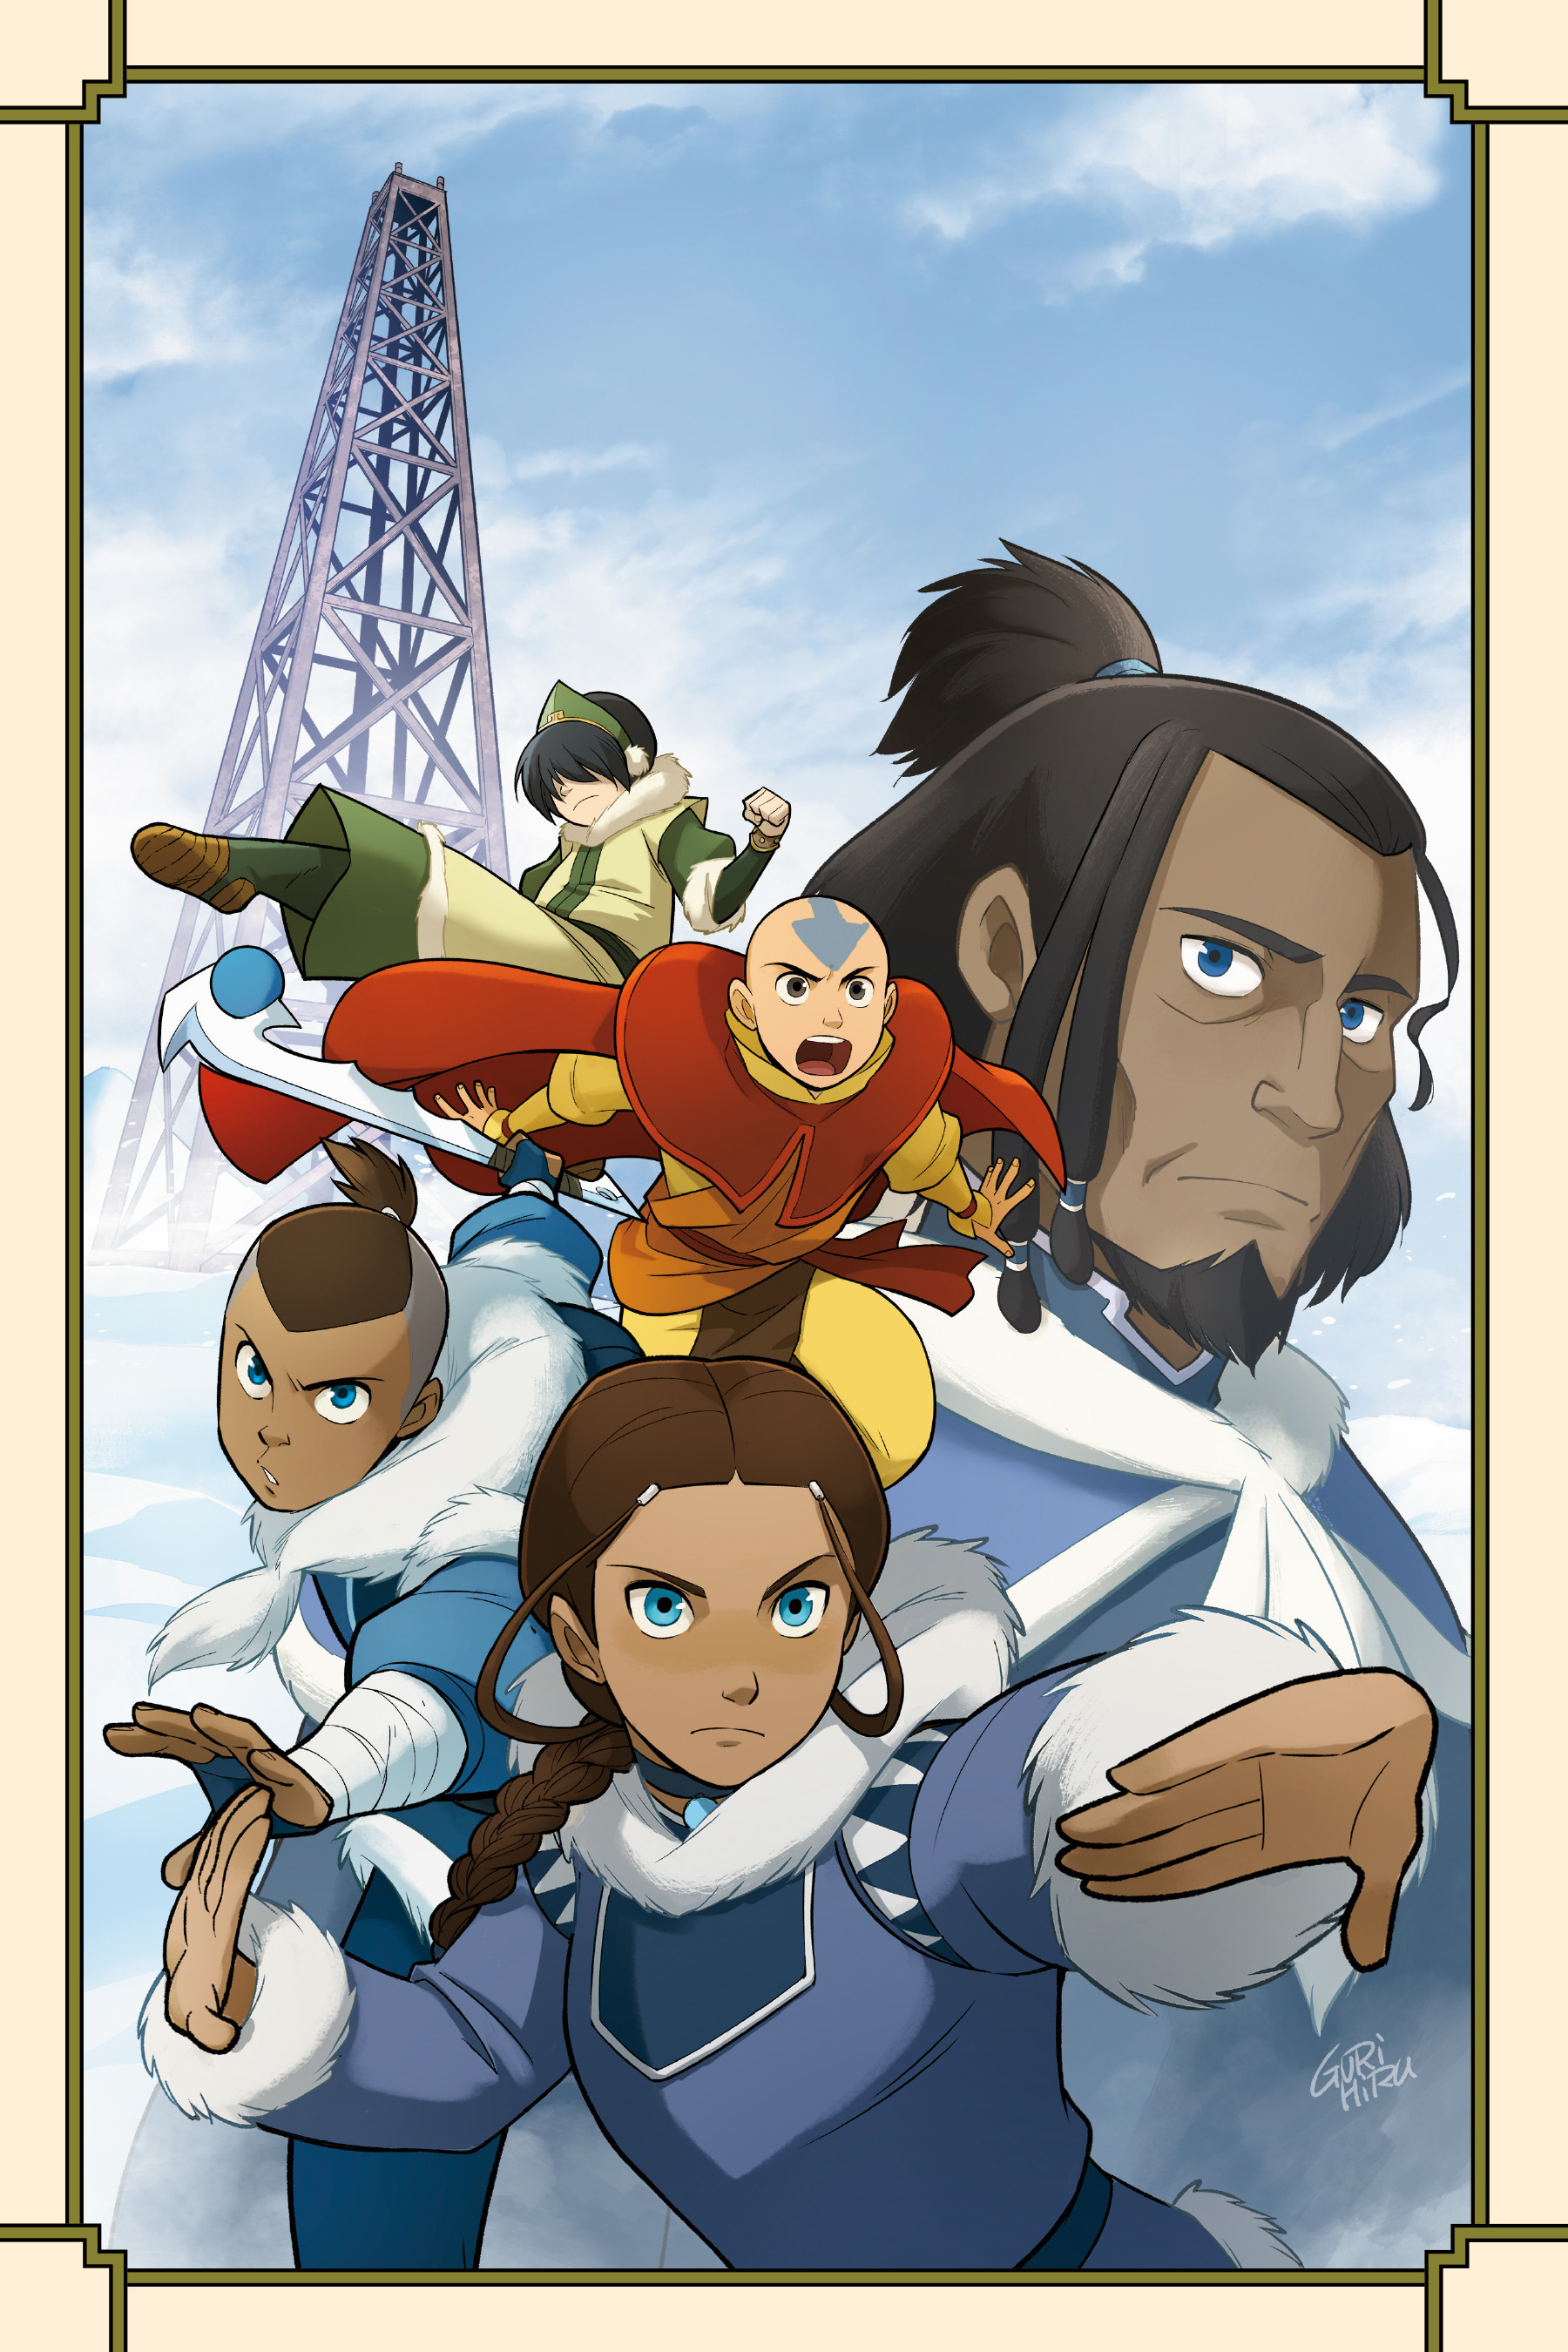 81 Top Best Writers Avatar The Last Airbender Episode 5 Book 2 for Learn